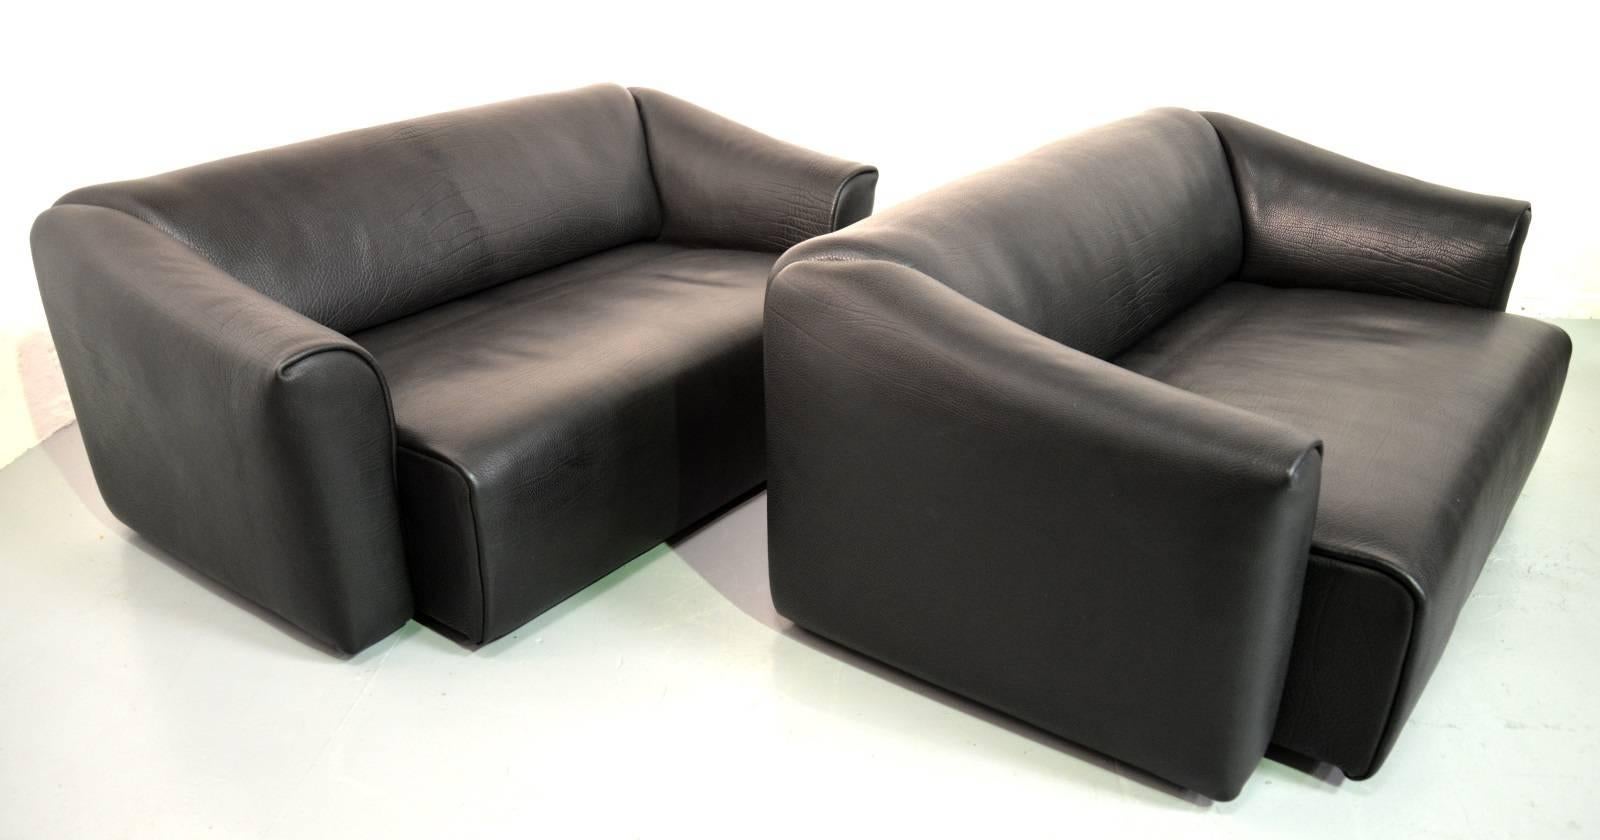 We are delighted to bring to you a pair of de Sede DS 47 designer leather sofas in thick black neck leather. Handmade with the highest quality buffalo leather in a stunning black color. The seating parts from both sofas can be extended by easily